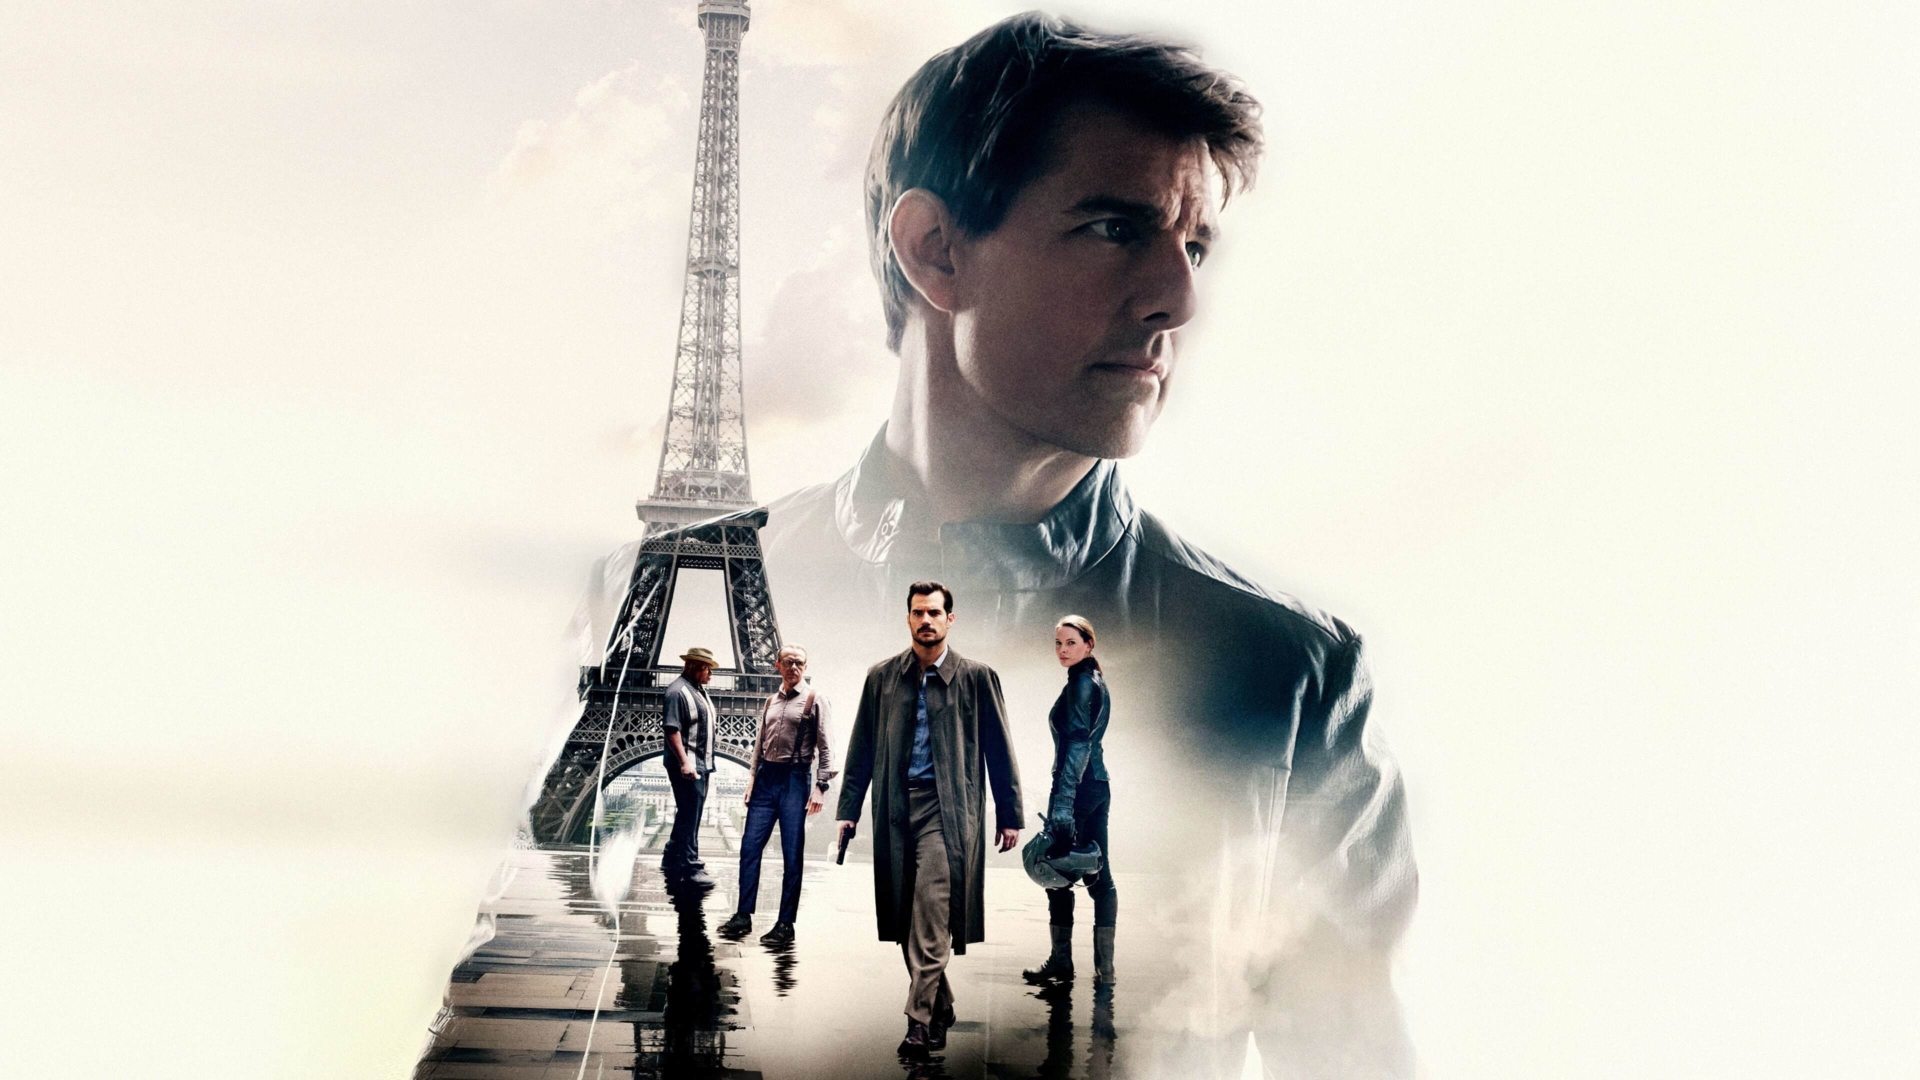 Mission: Impossible - Fallout (Mission: Impossible - Fallout)